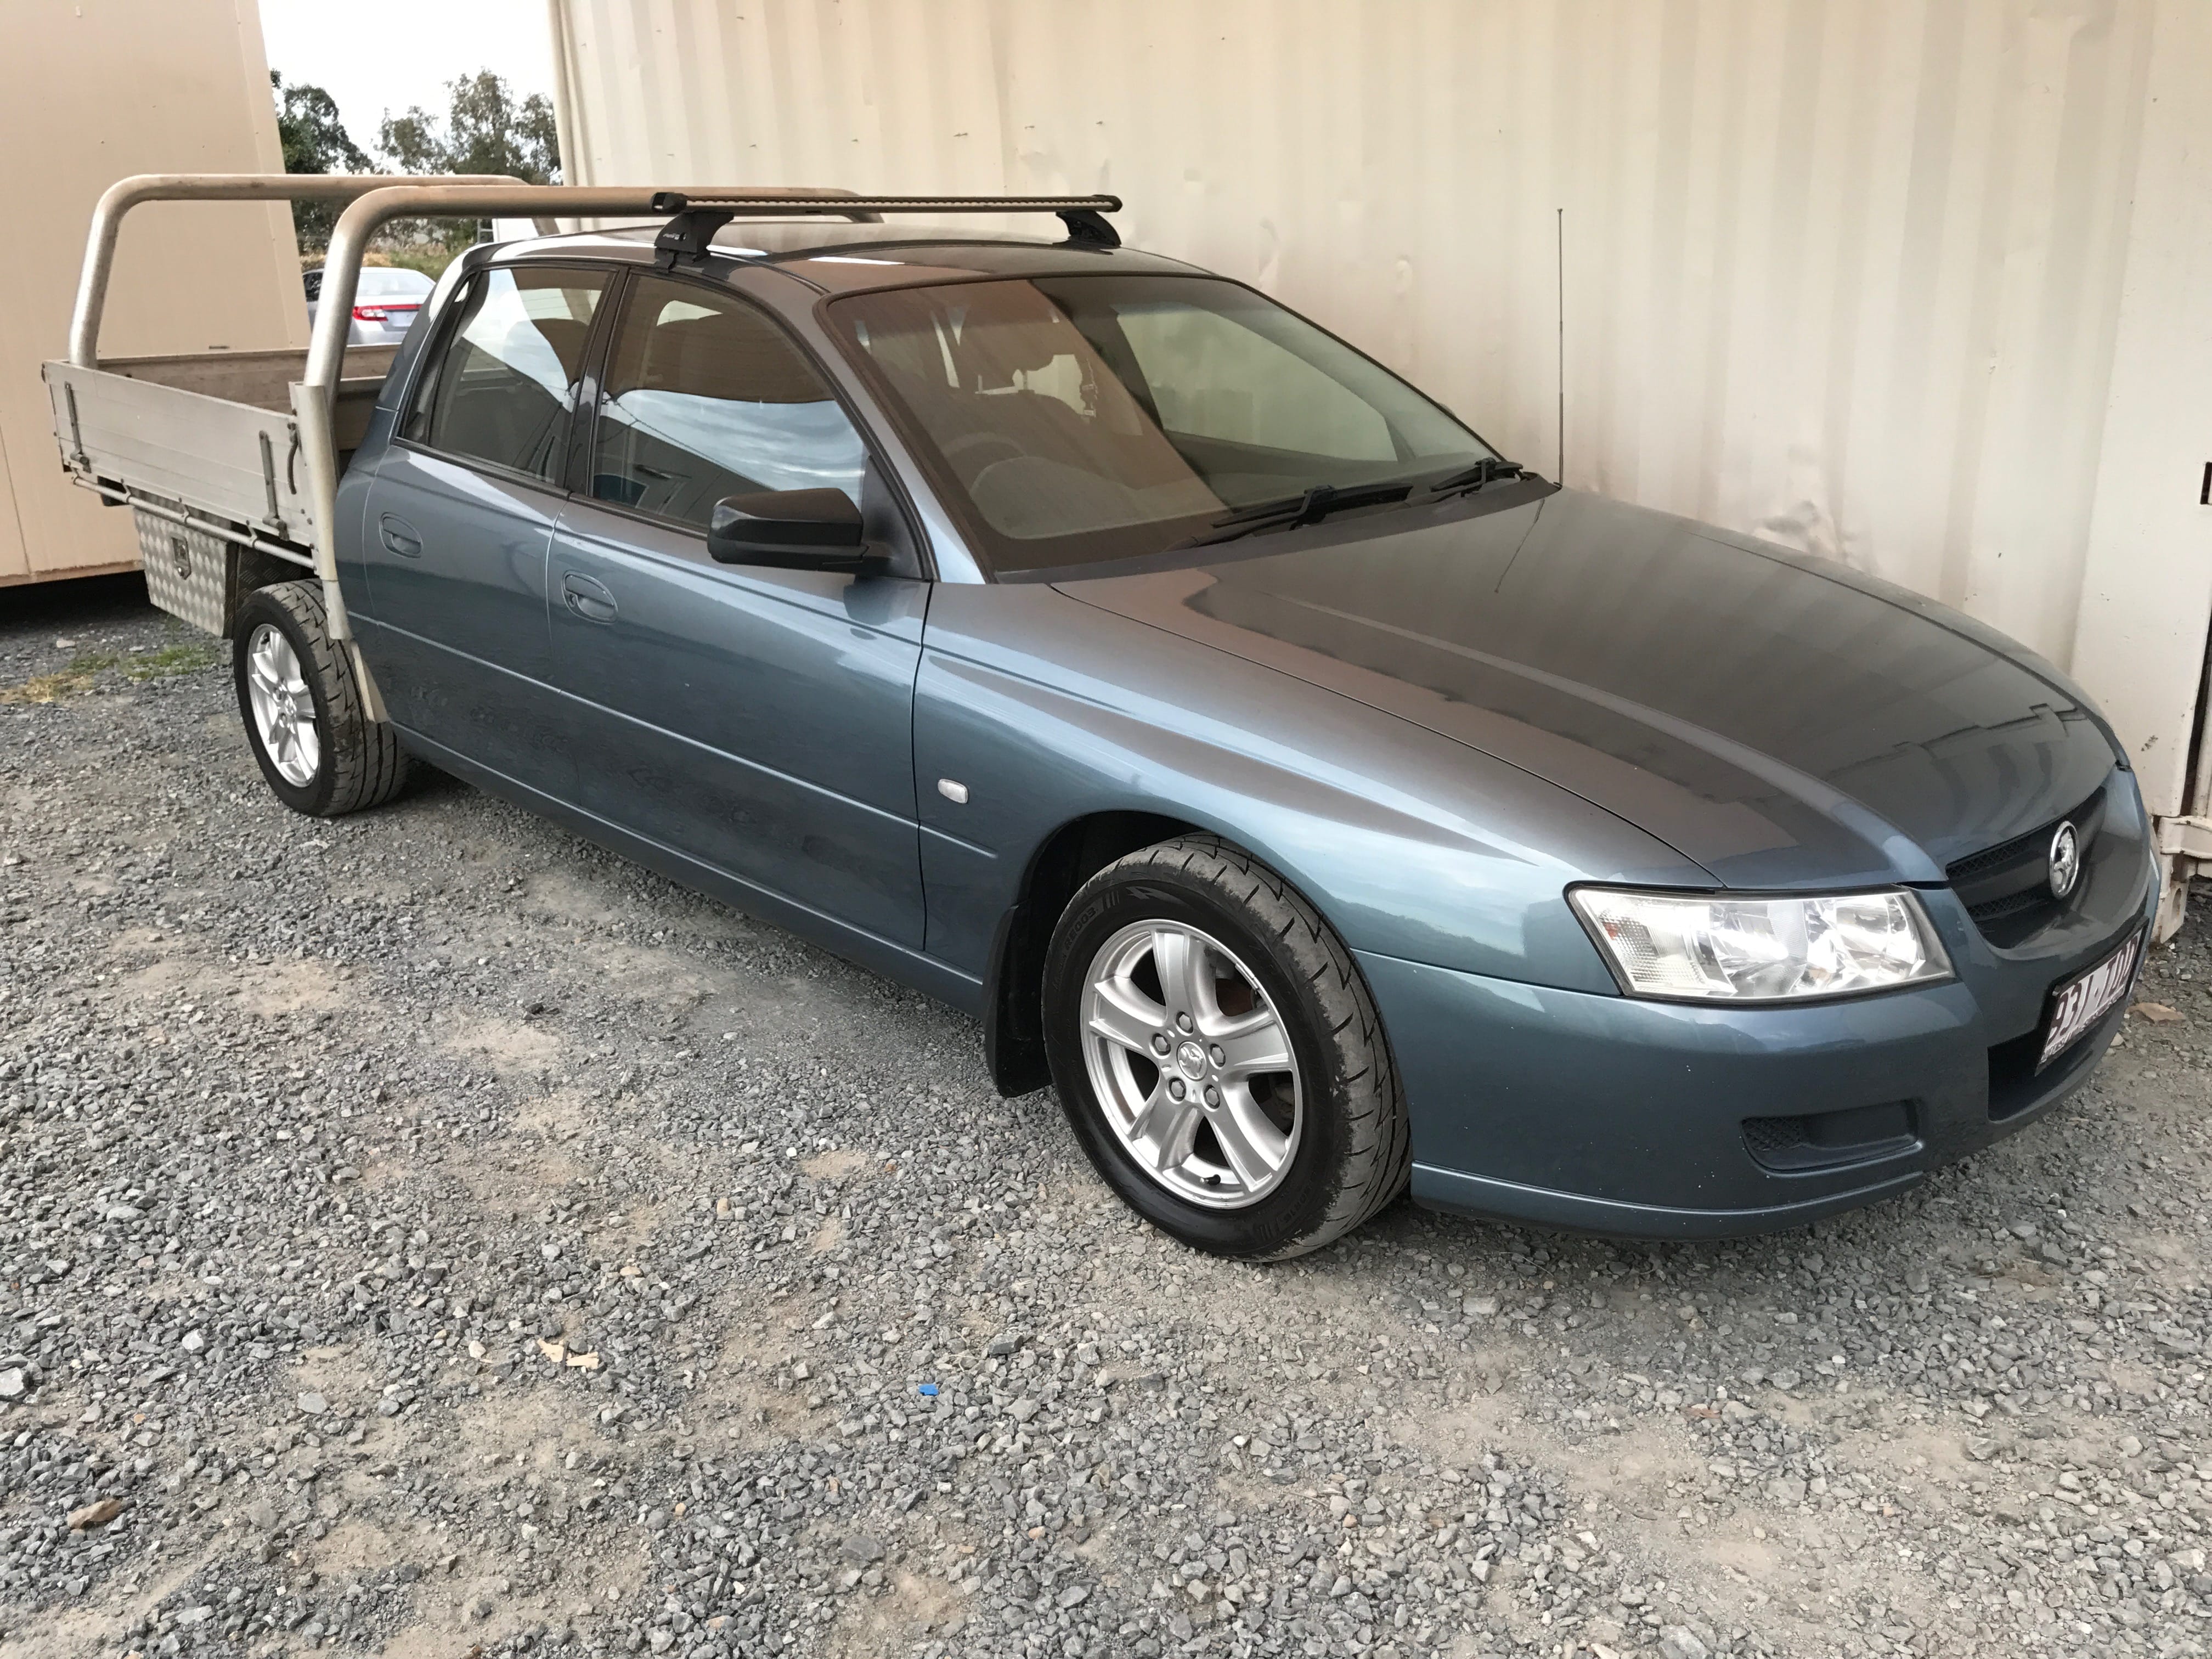 Holden Commodore VY Crewman 2005 Alloy Tray for sale 1-min